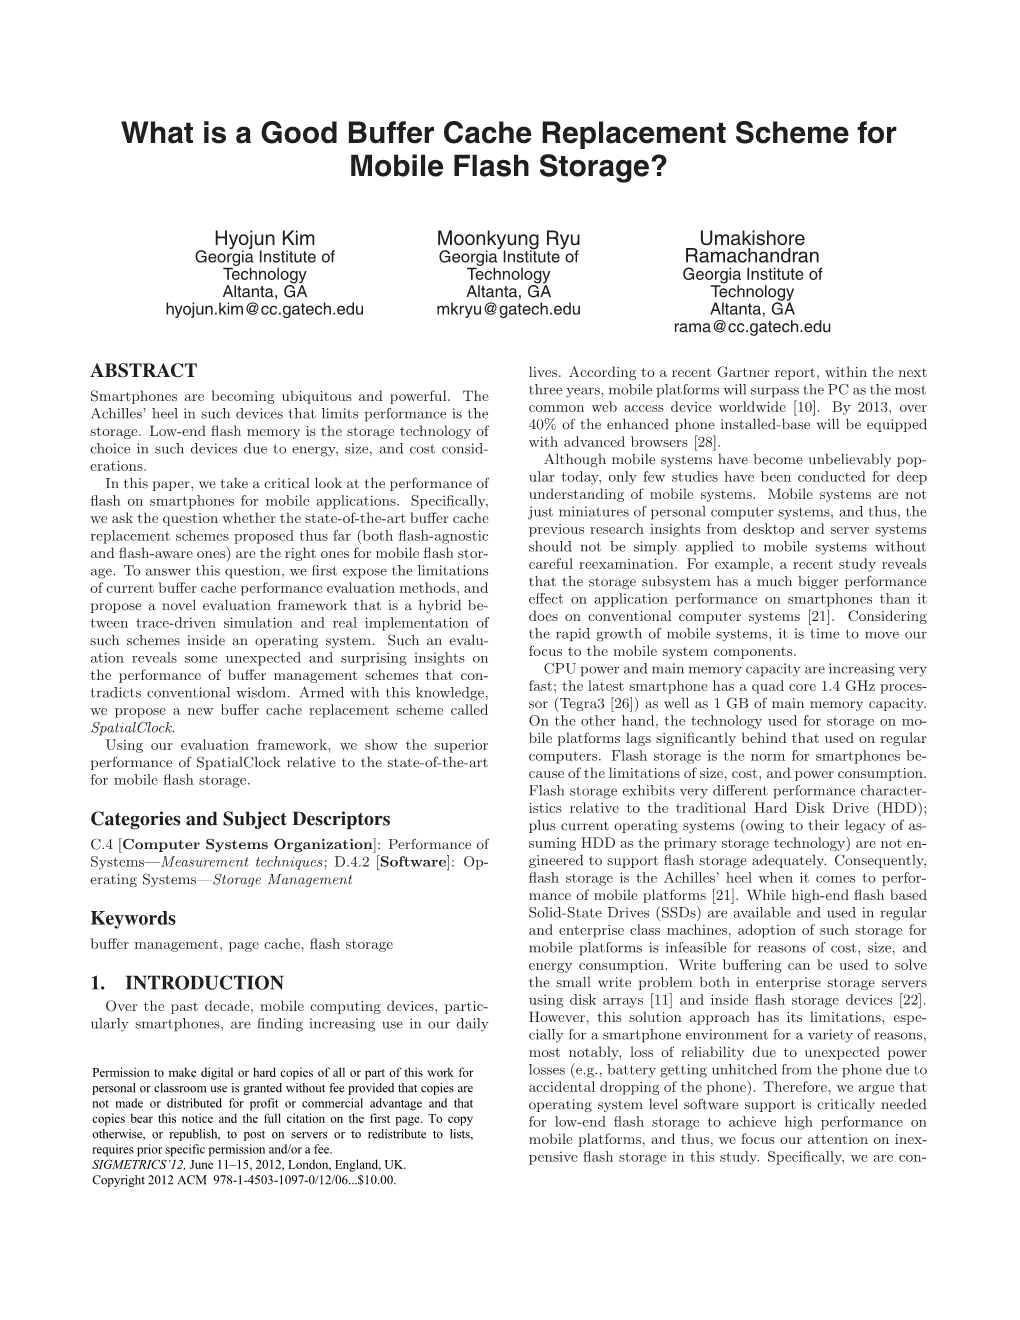 What Is a Good Buffer Cache Replacement Scheme for Mobile Flash Storage?